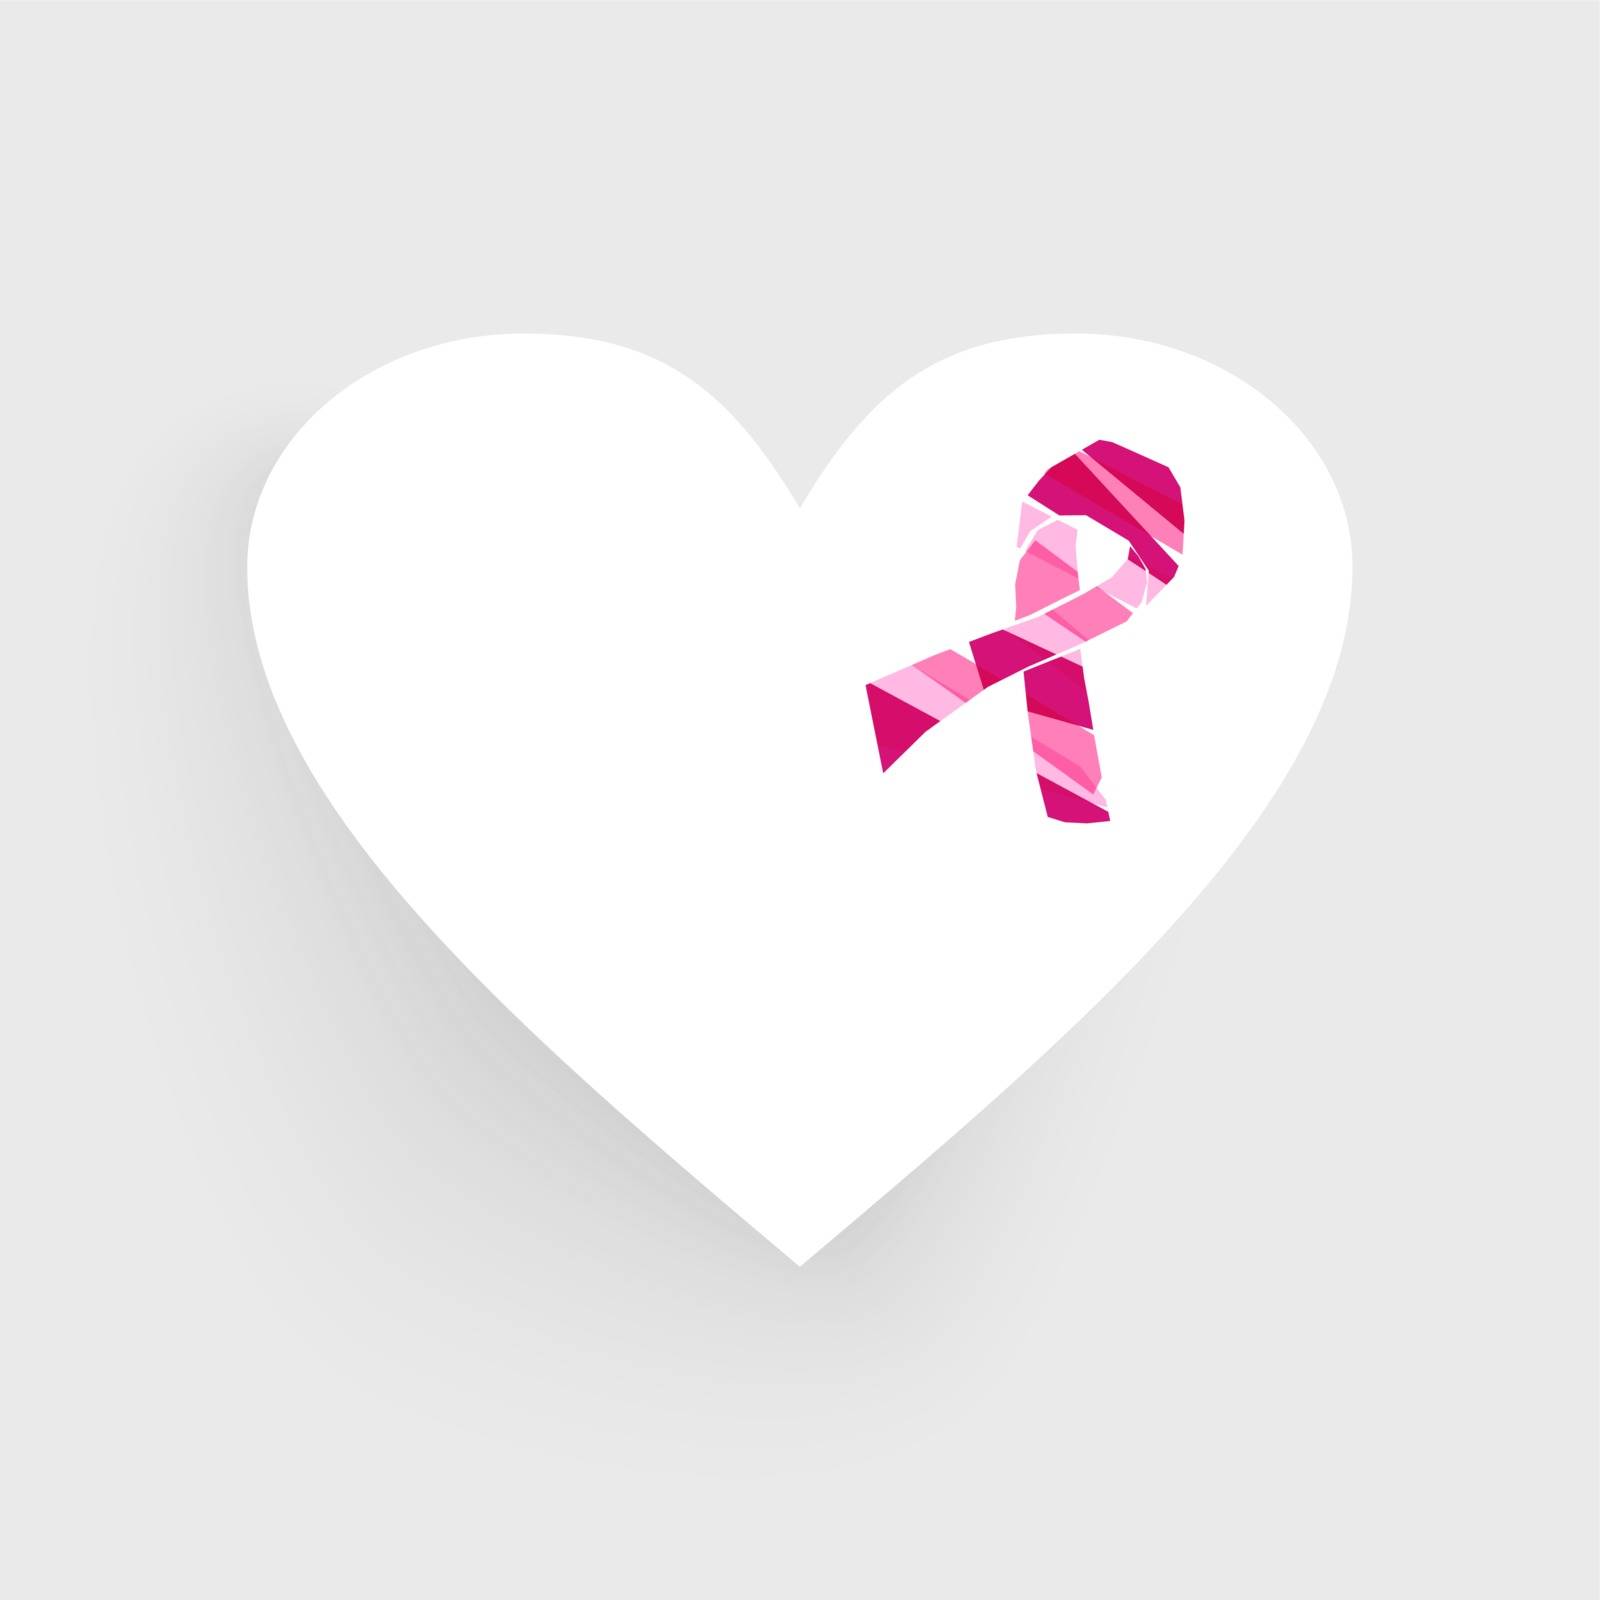 Breast cancer awareness ribbon symbol made with heart shape background. EPS10 vector file with transparency organized in layers for easy editing.